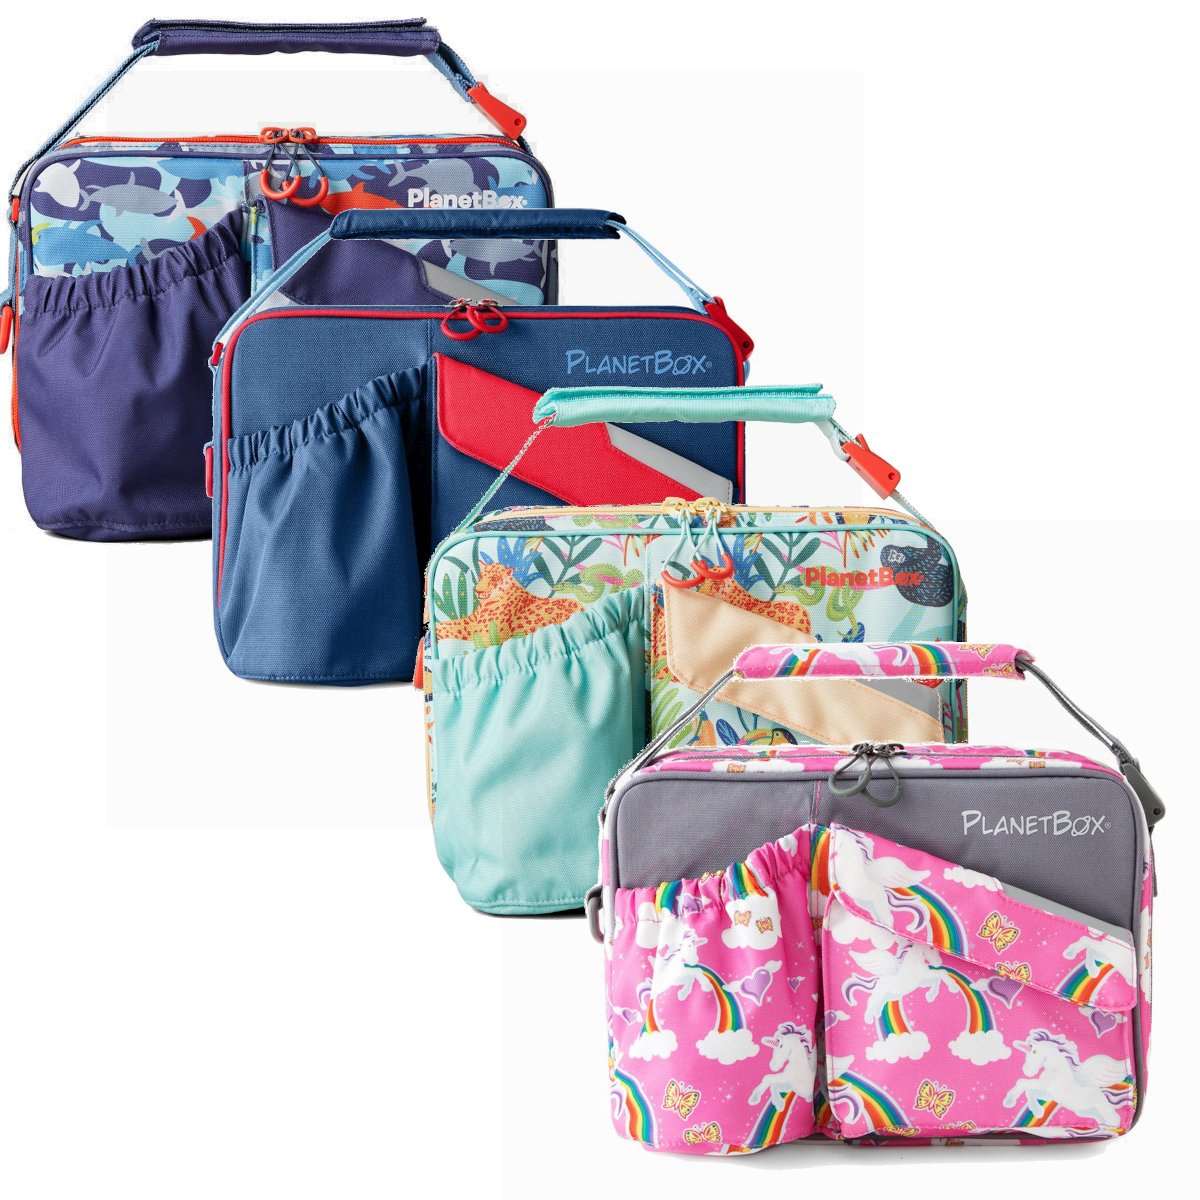 Planetbox Insulated Carry Bag - LunchBox Inc.